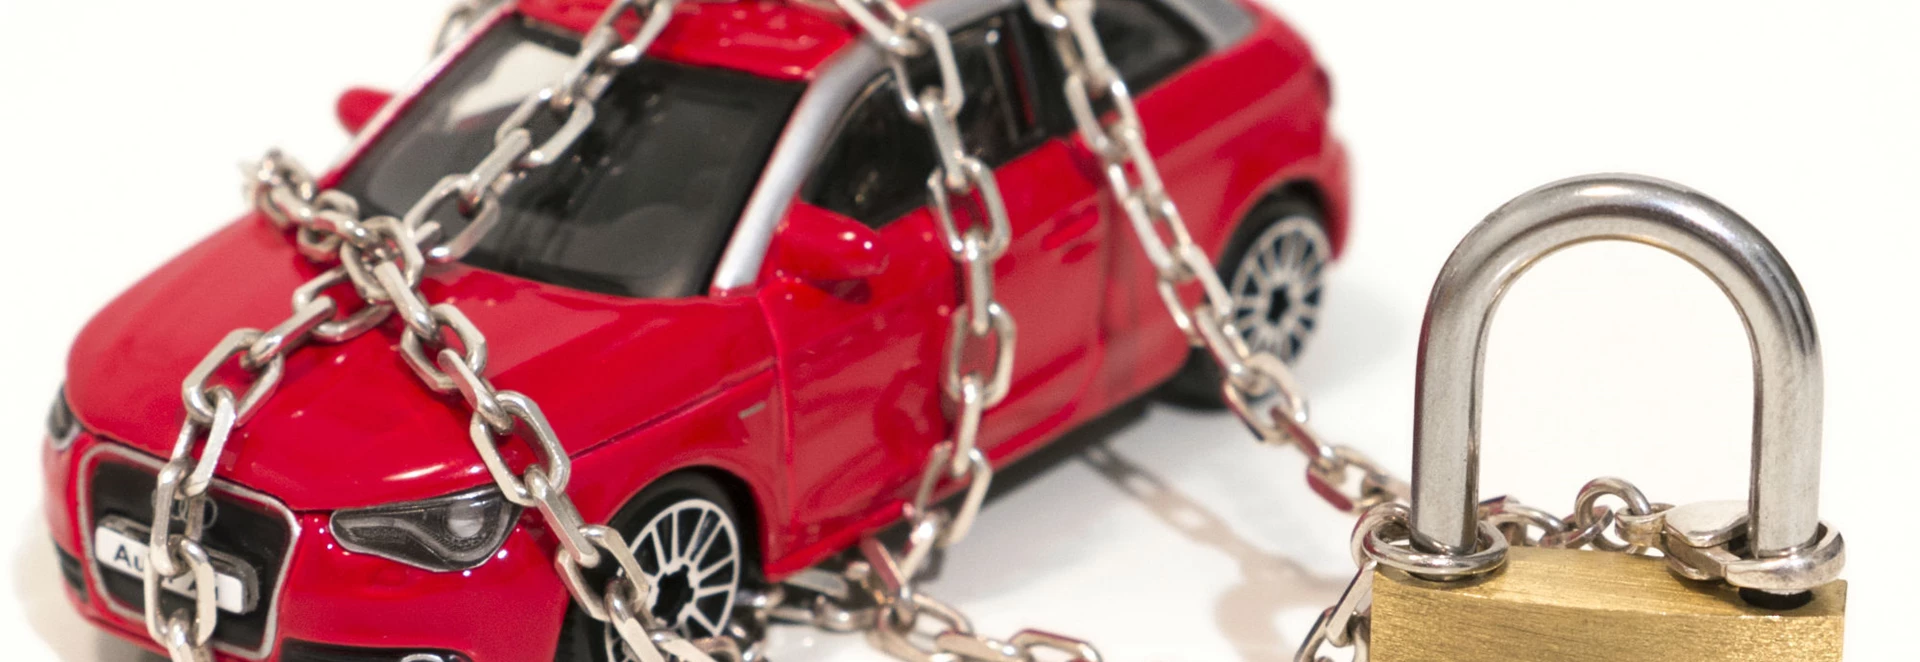 Eight myths about car insurance debunked 